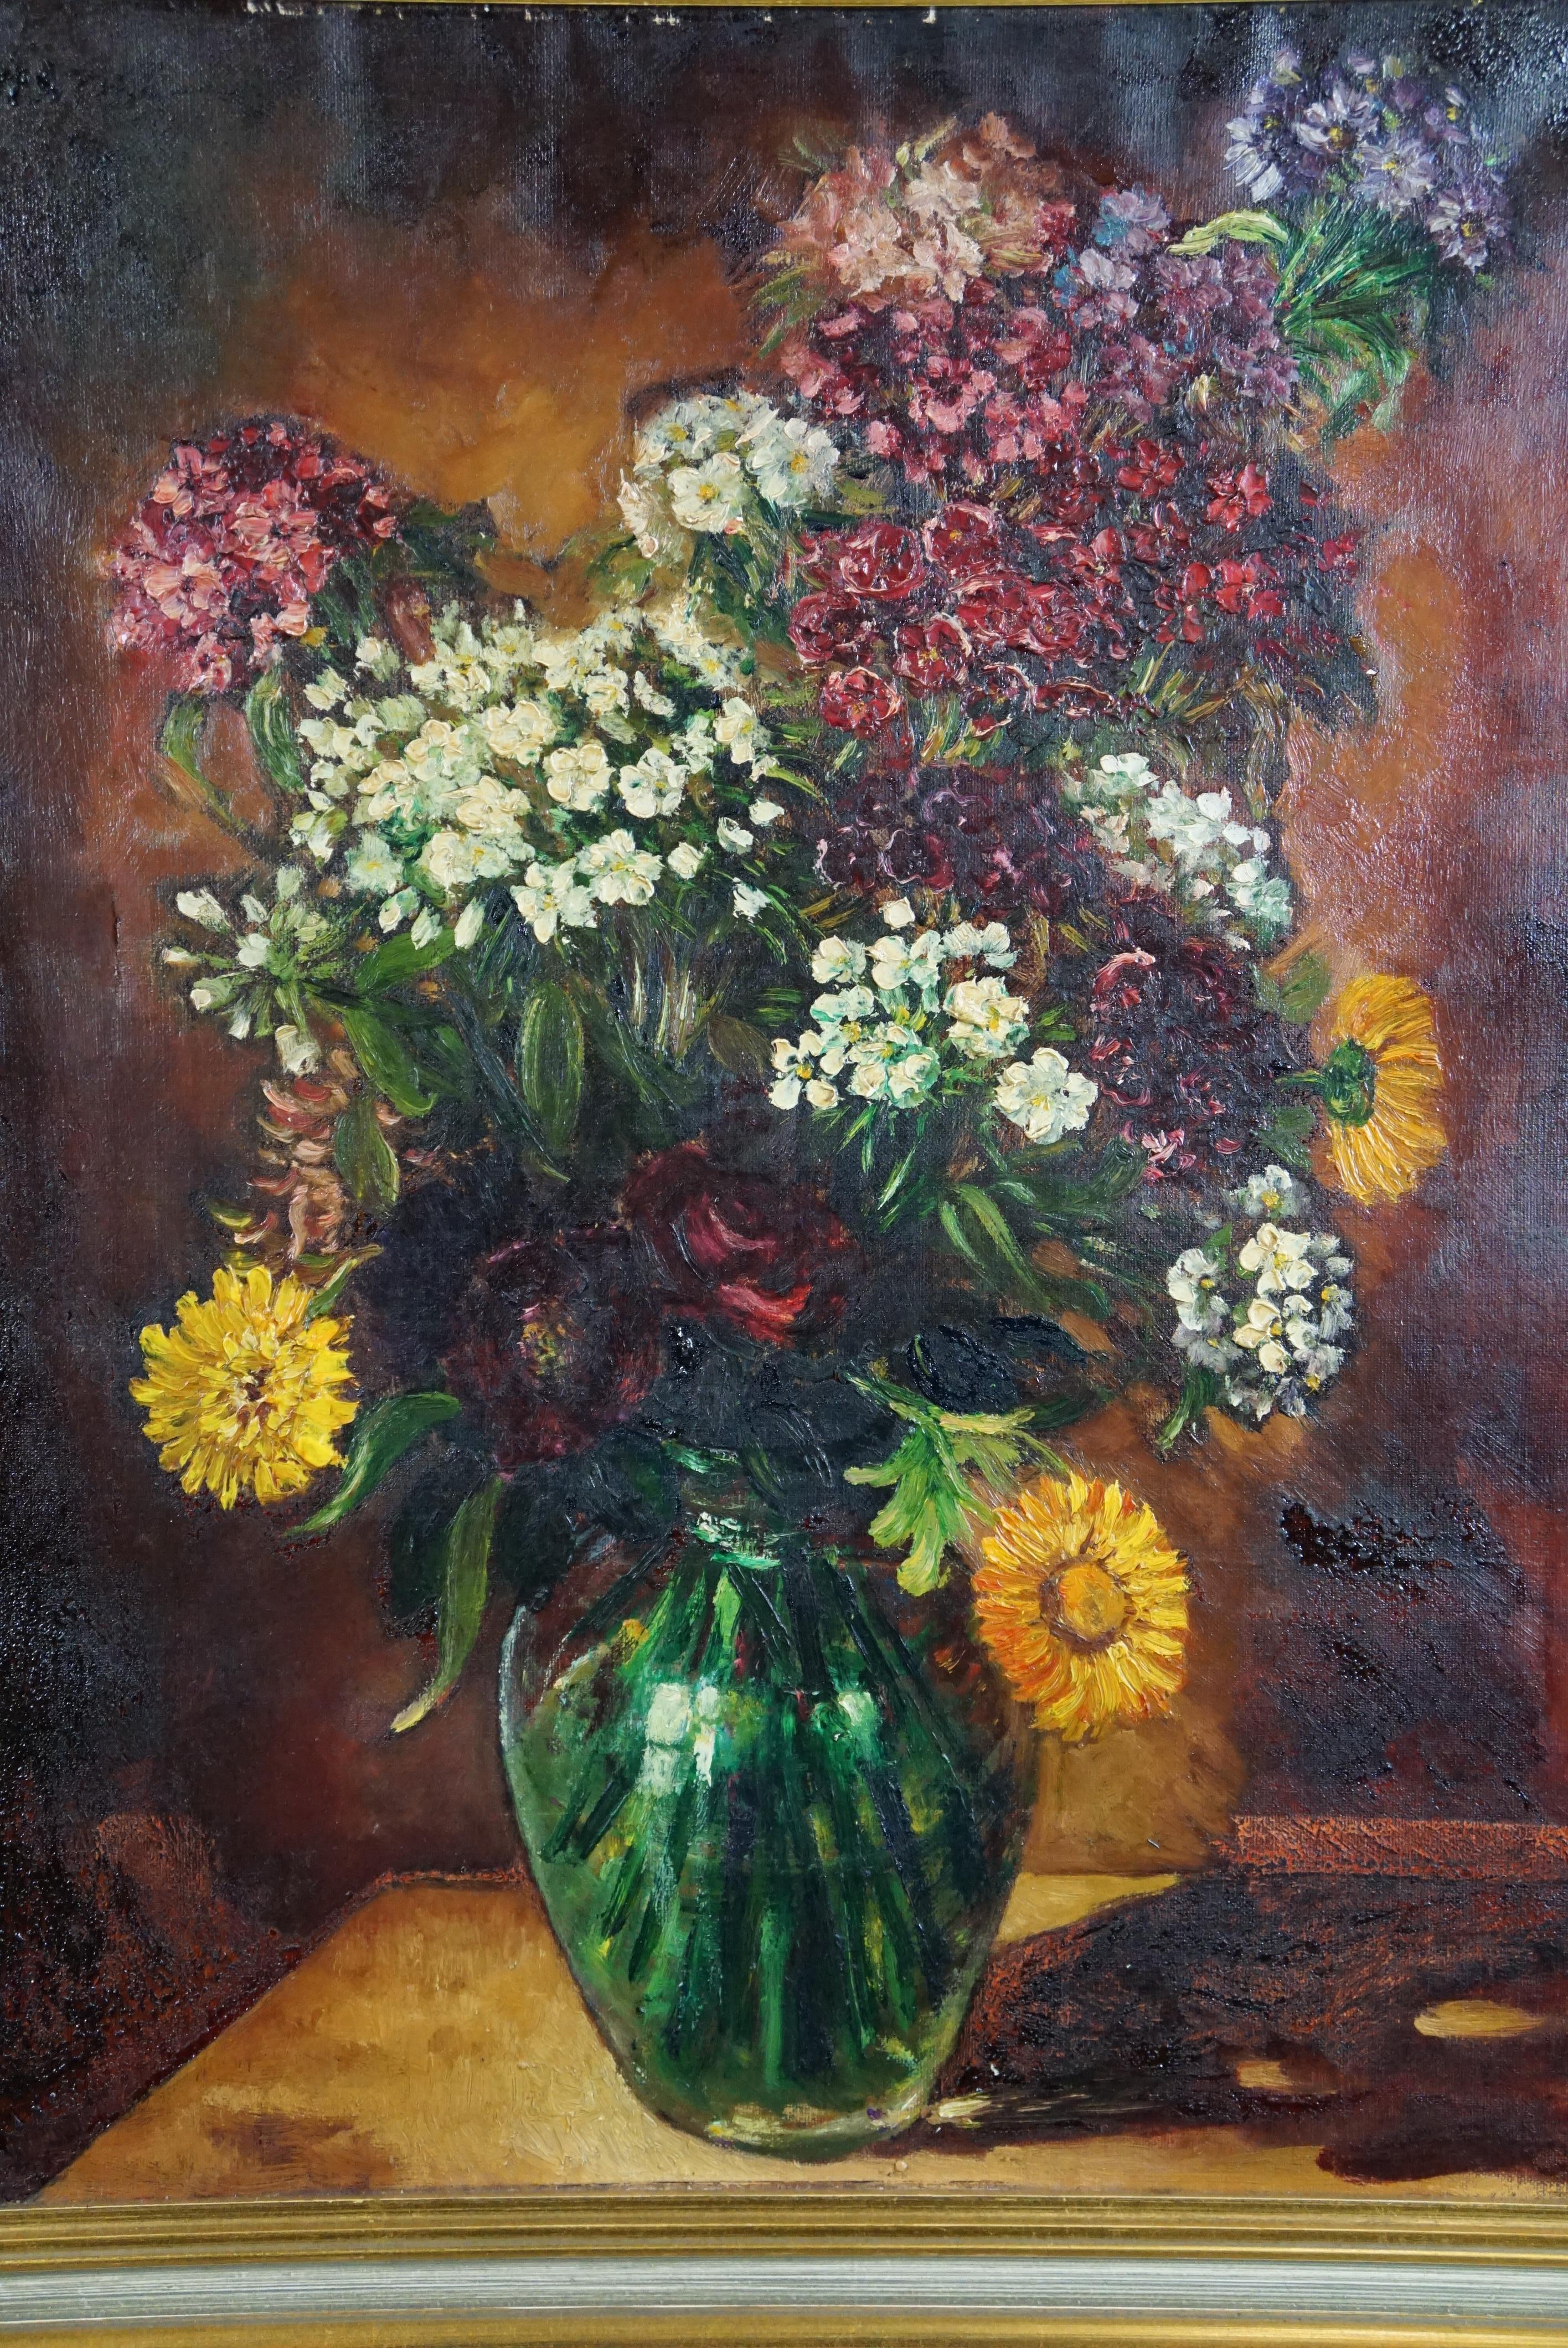 Offered is this floral beauty captured in oil paint in warm colors. Transform your space into an oasis of natural beauty and sophistication with this breathtaking oil painting of a glass vase with flowers. This artwork will not only brighten up your